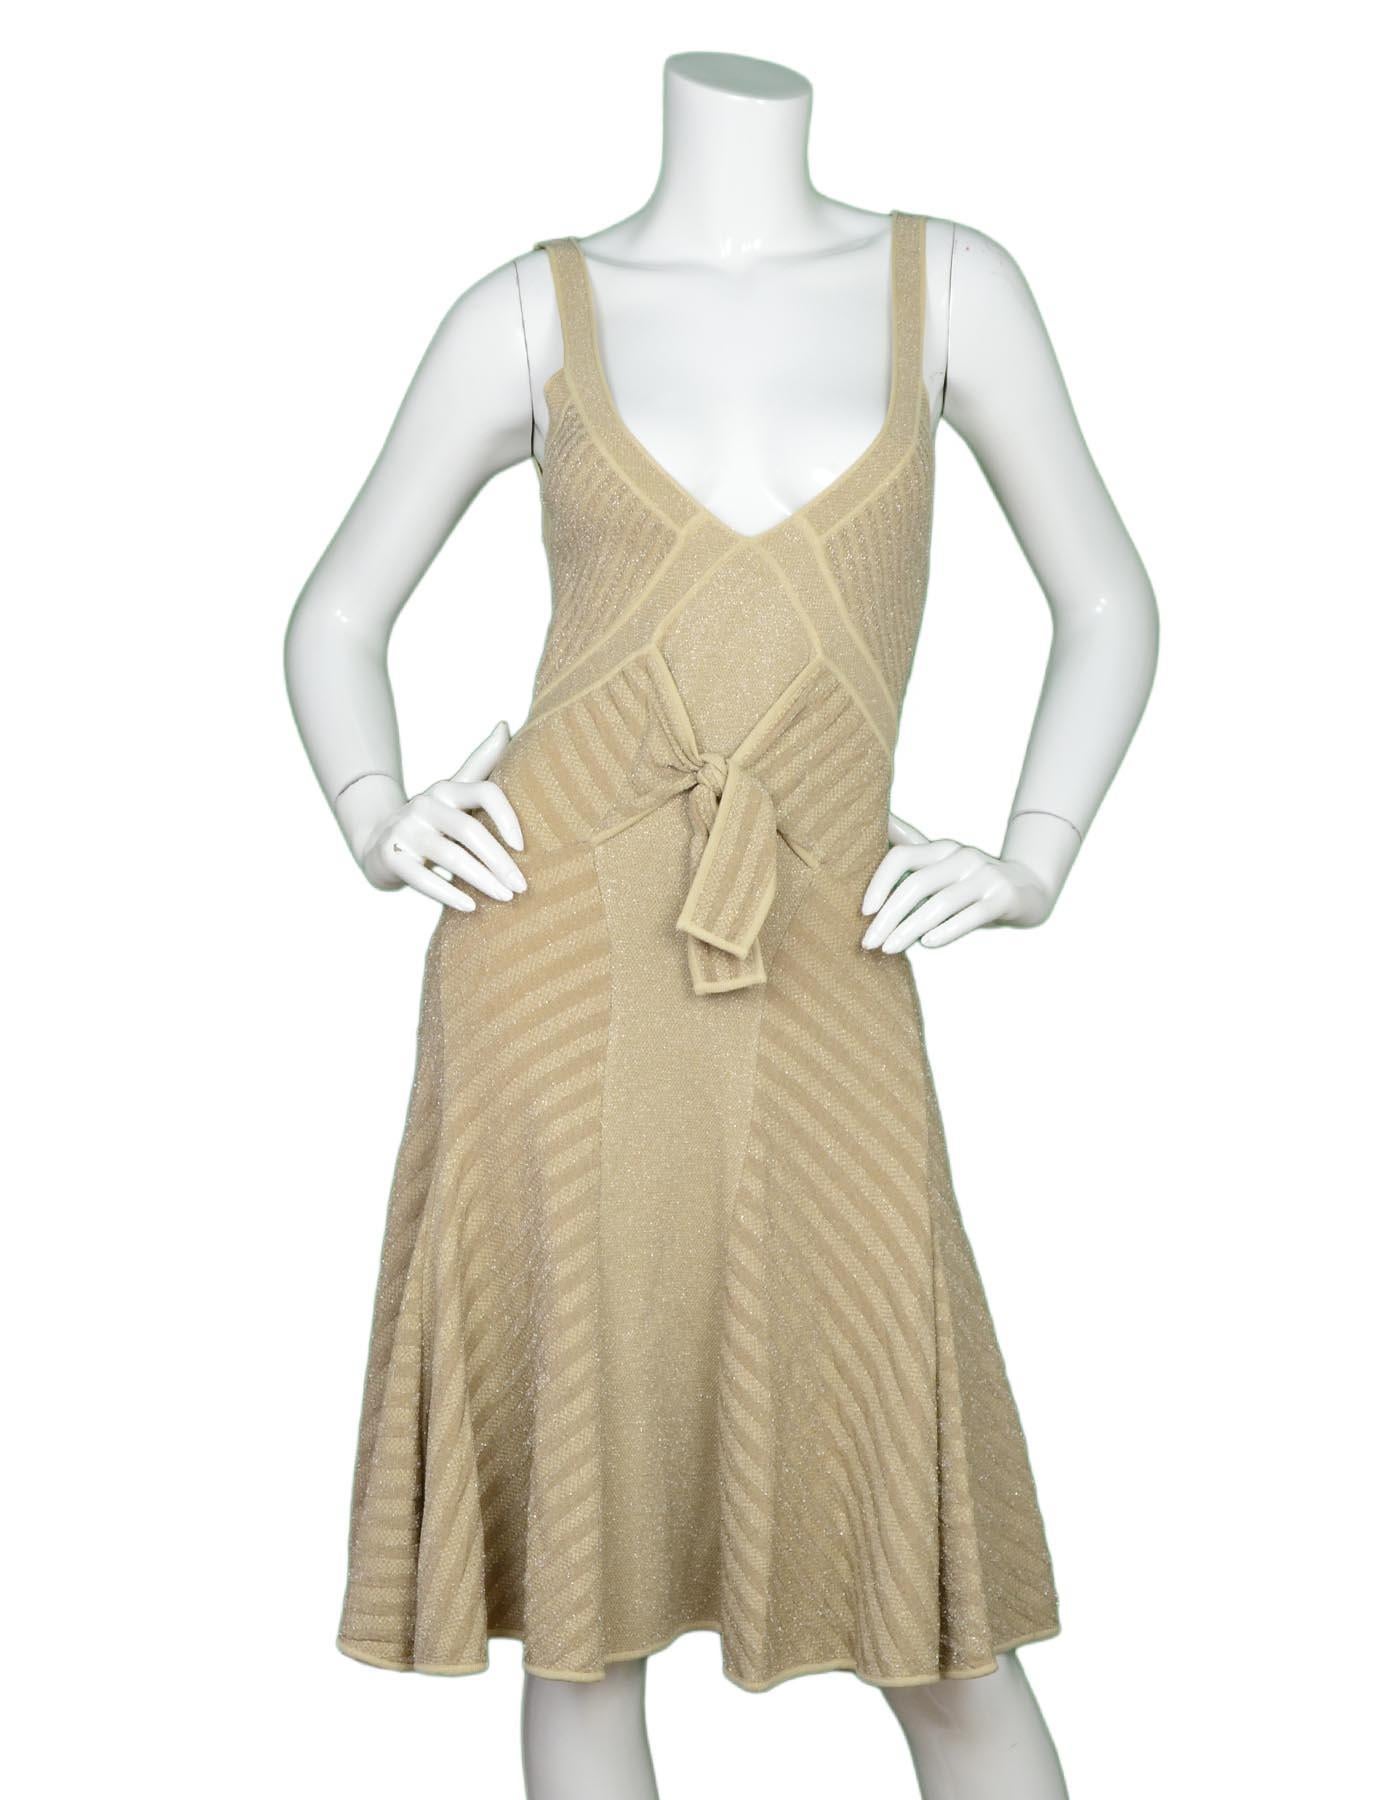 Zac Posen Tan Sleeveless V-Neck Flare Bow Dress W/ Silver Lurex Sz L

Made In: Italy
Color: Tan w/ silver lurex
Materials: 76% rayon, 13% elite polyester, 11% polyester
Opening/Closure: Pull over
Overall Condition: Excellent pre-owned condition